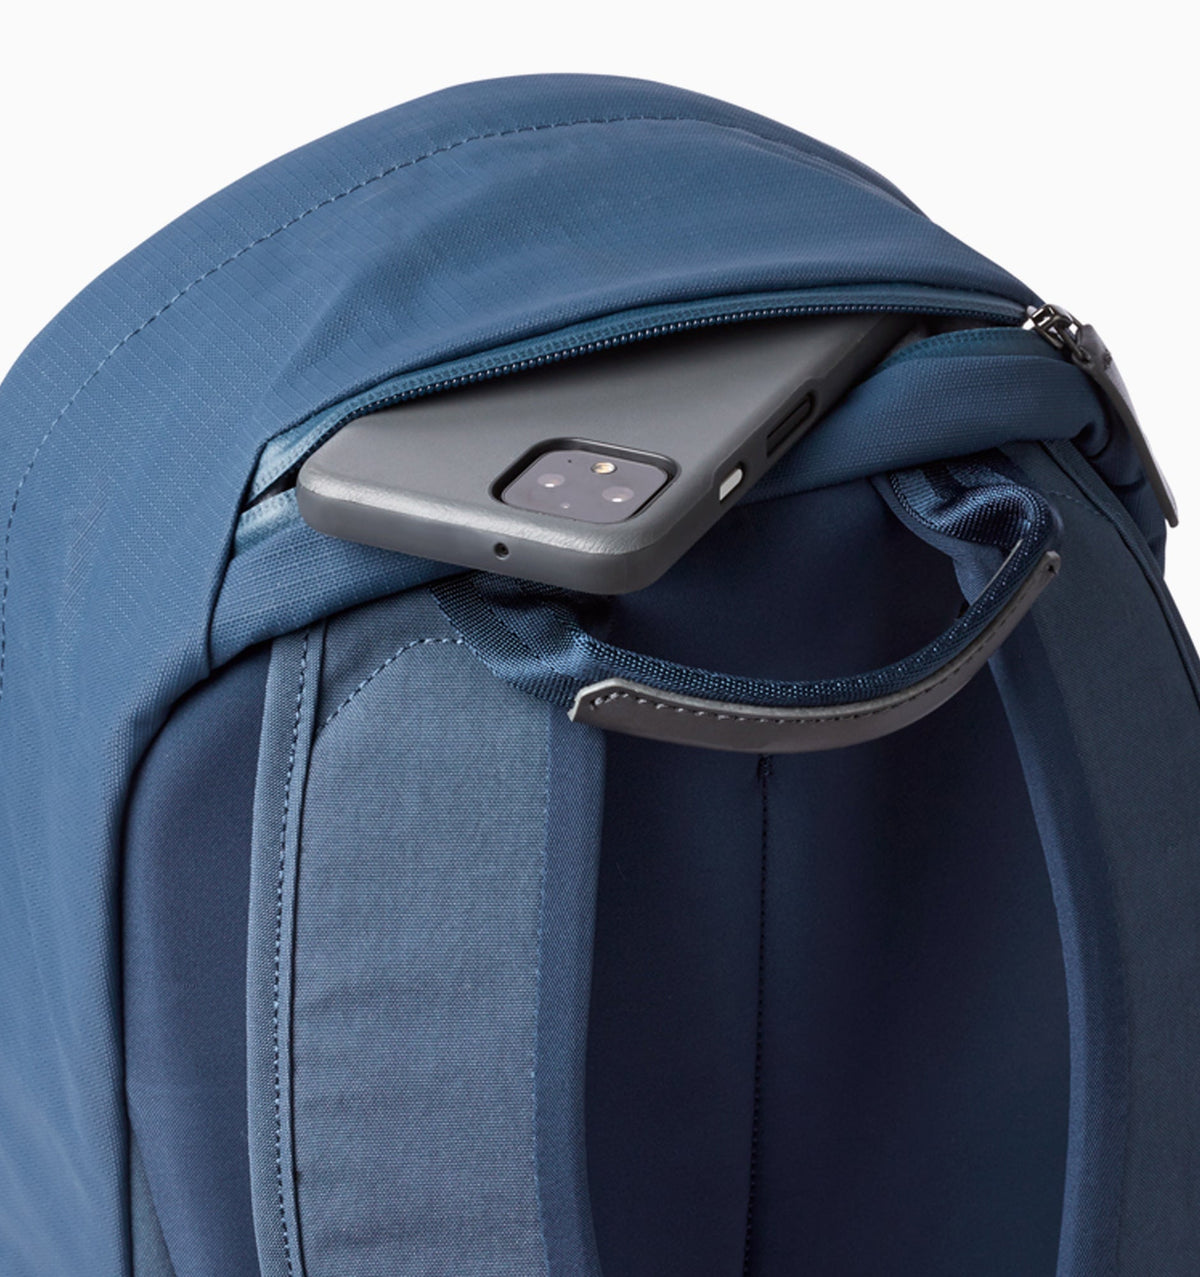 Bellroy Classic Backpack Compact - Marine Blue